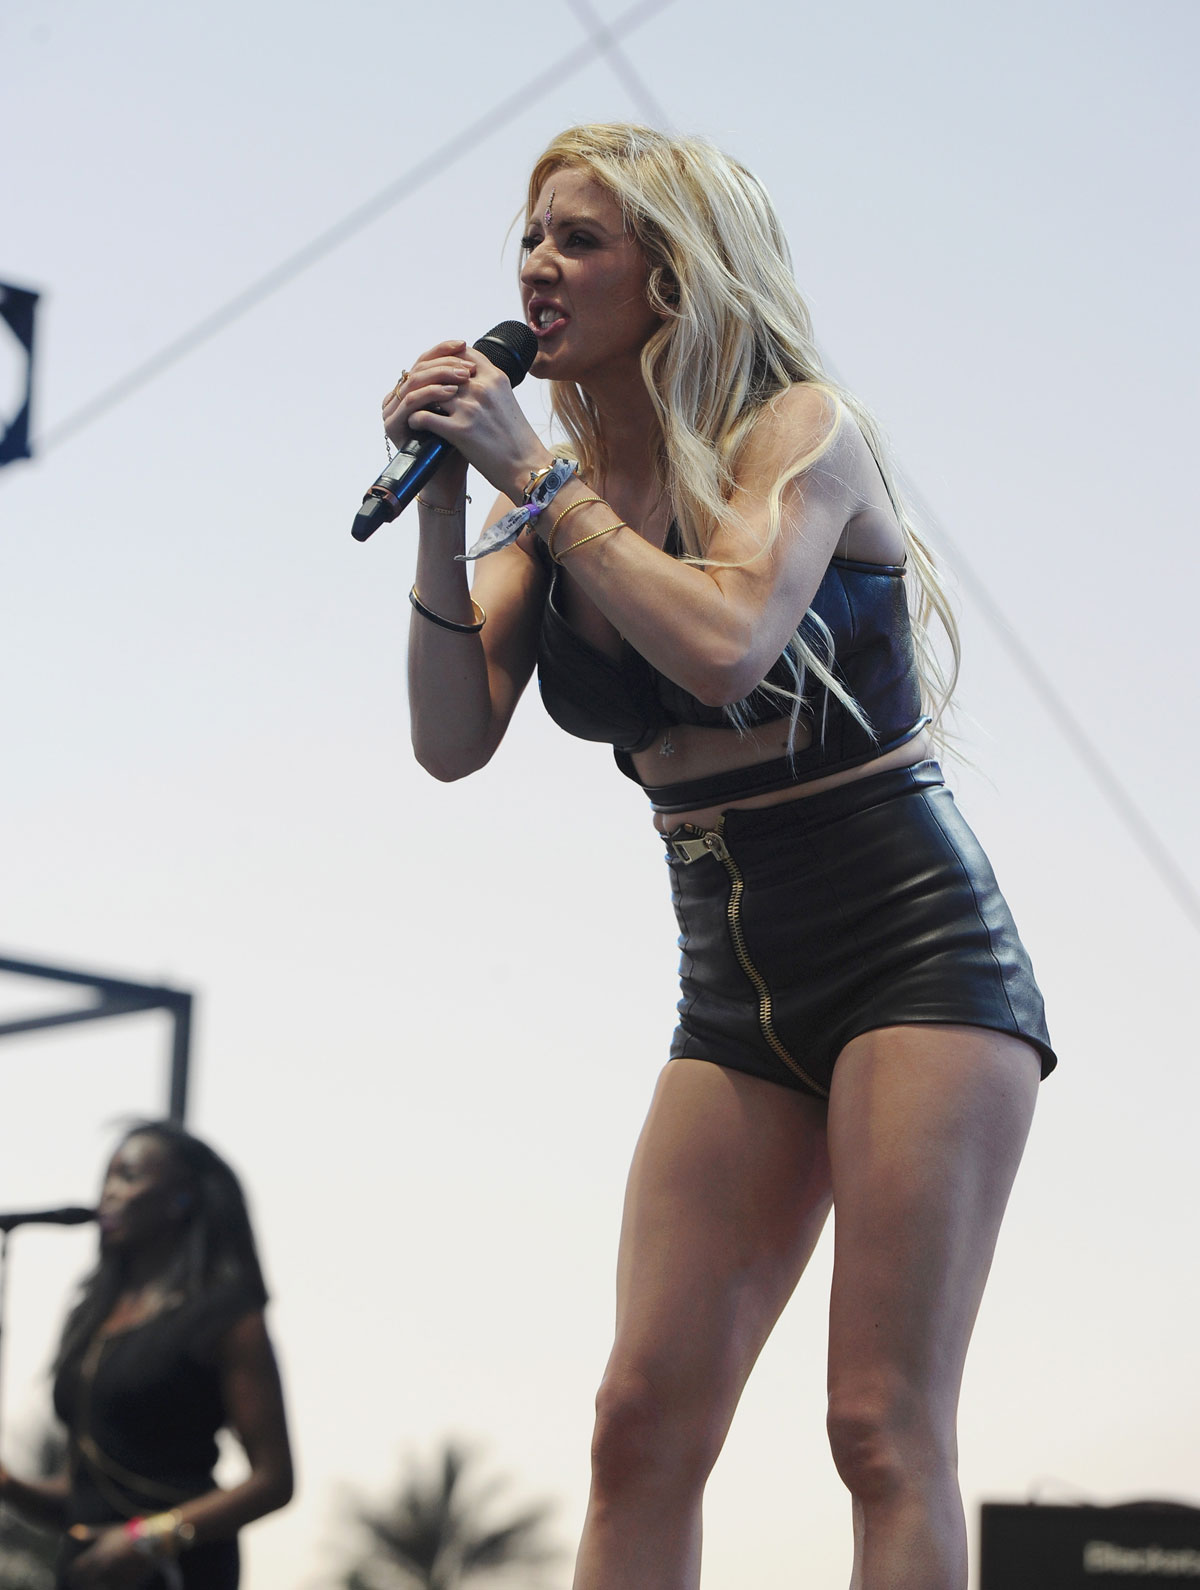 Ellie Goulding performs onstage at the 2014 Coachella